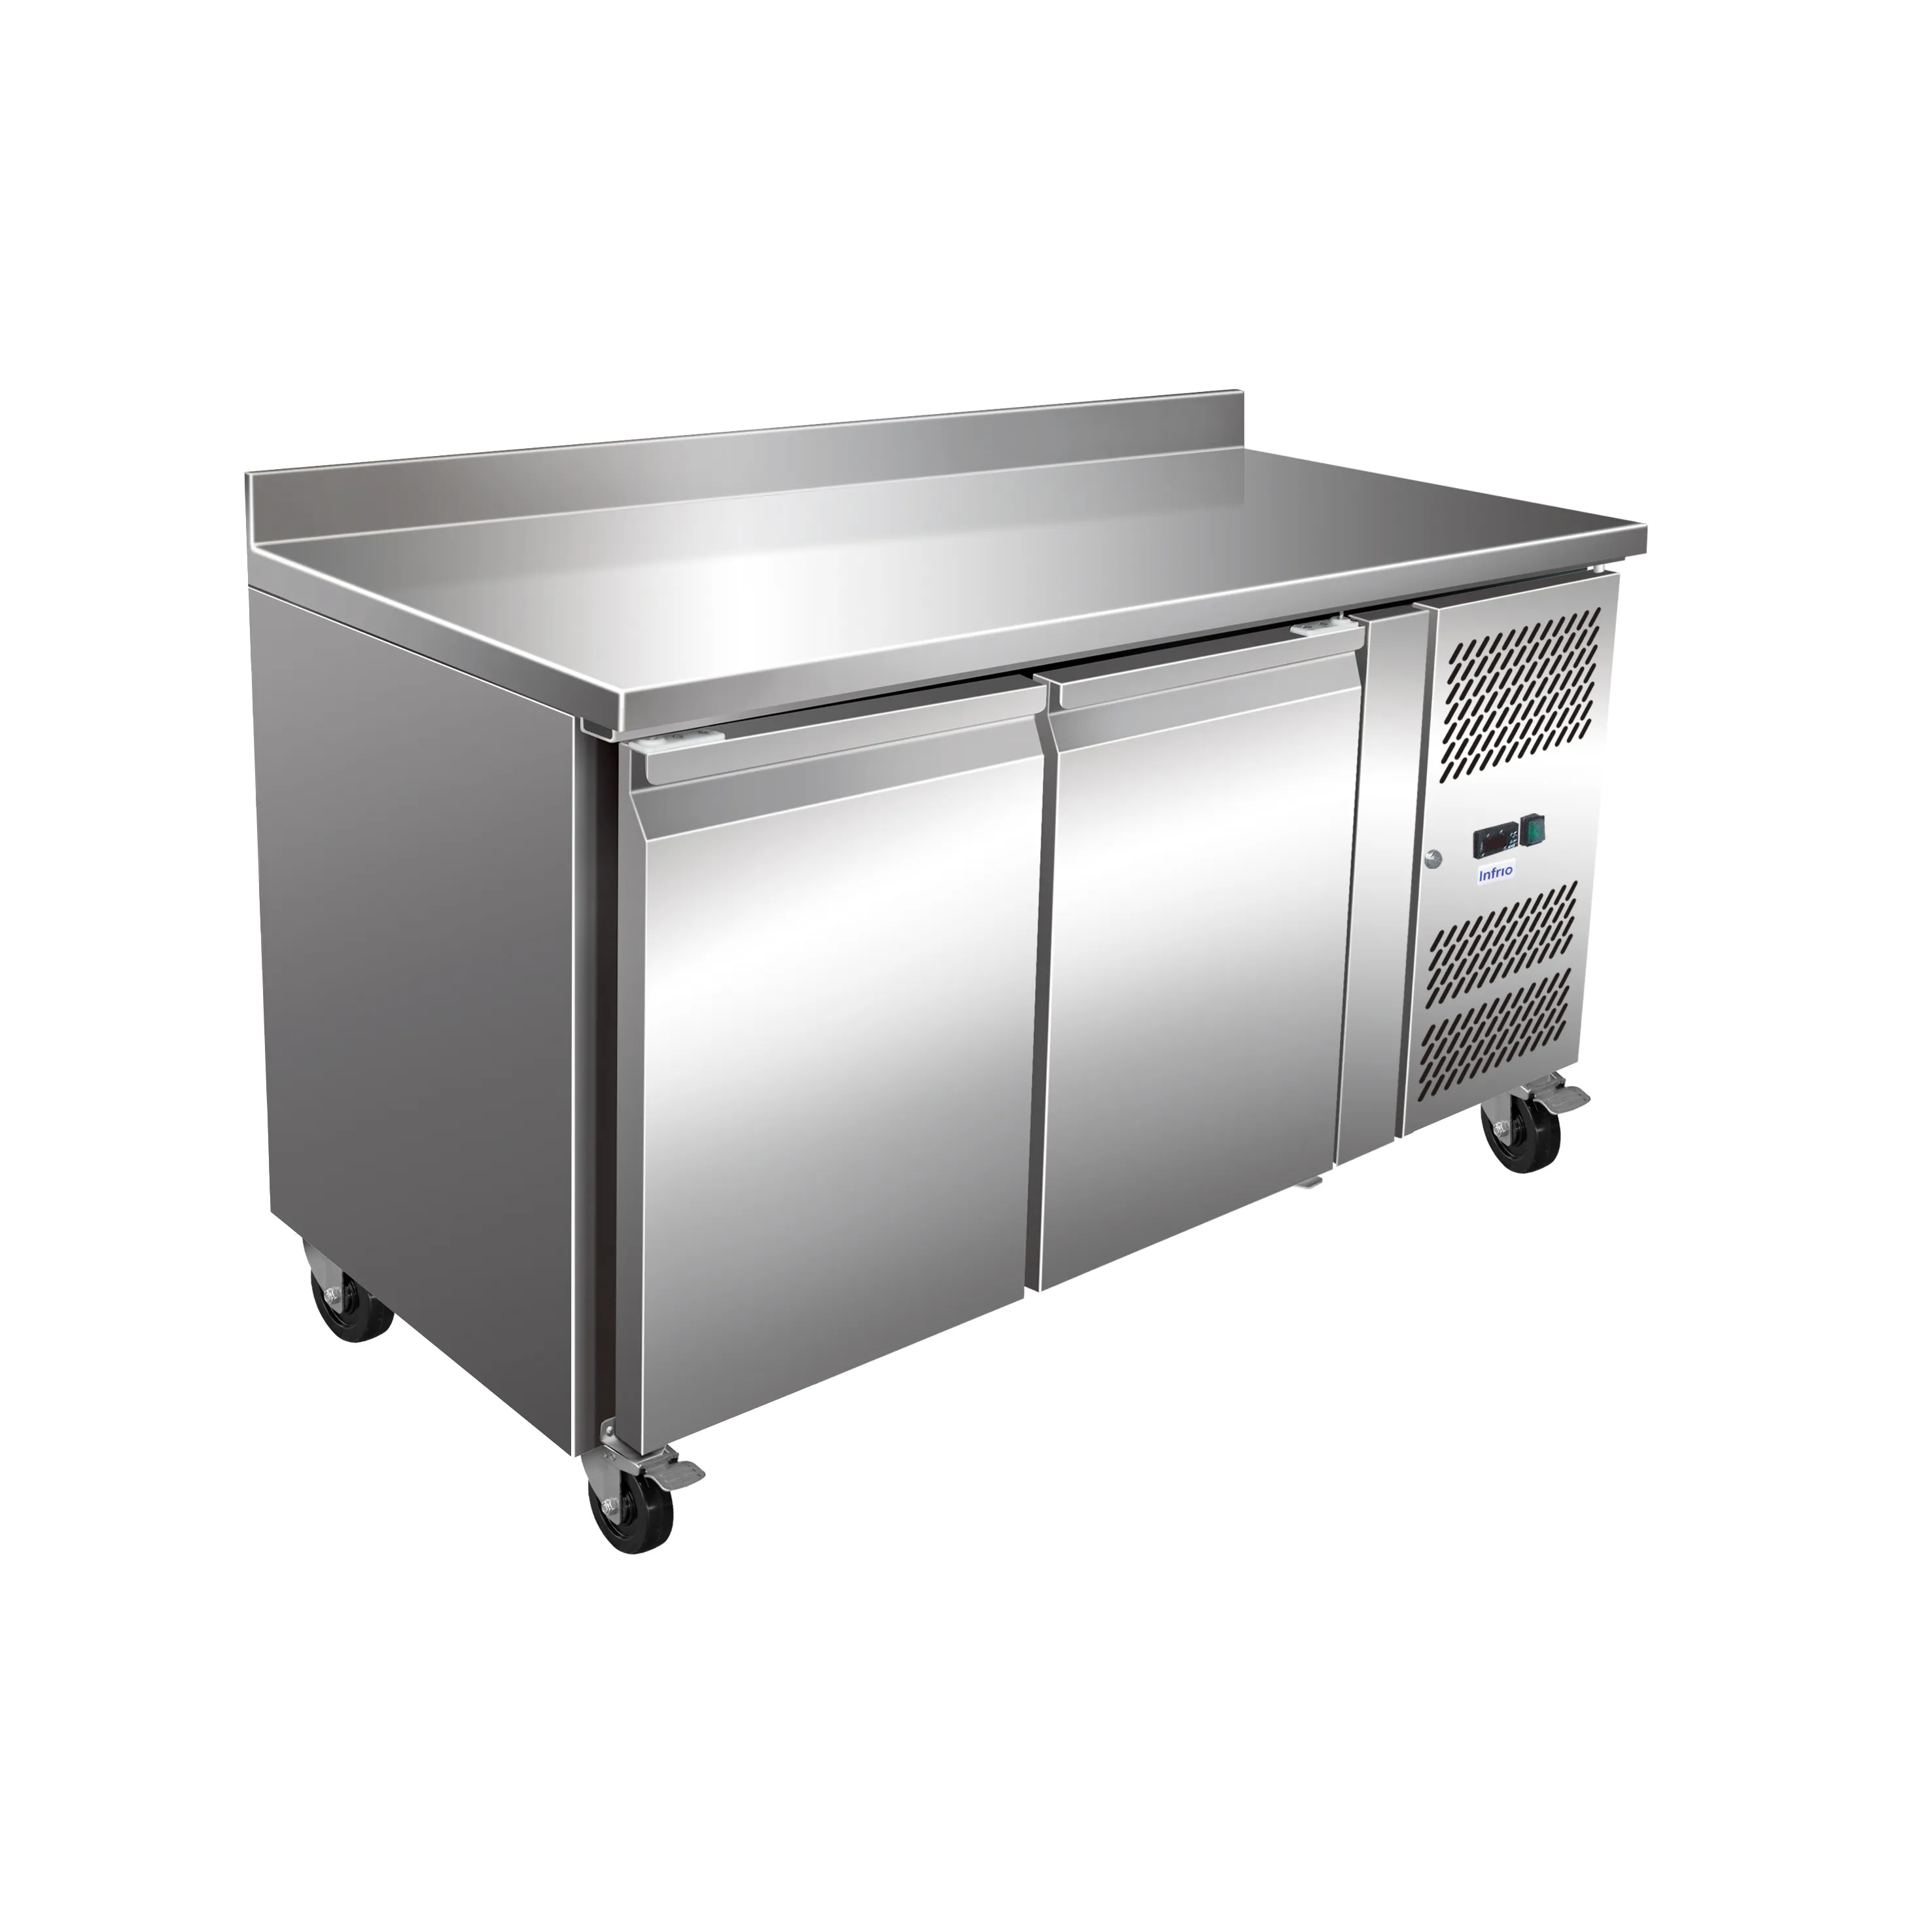 Infrio BMGN 1360S Refrigerated Counter